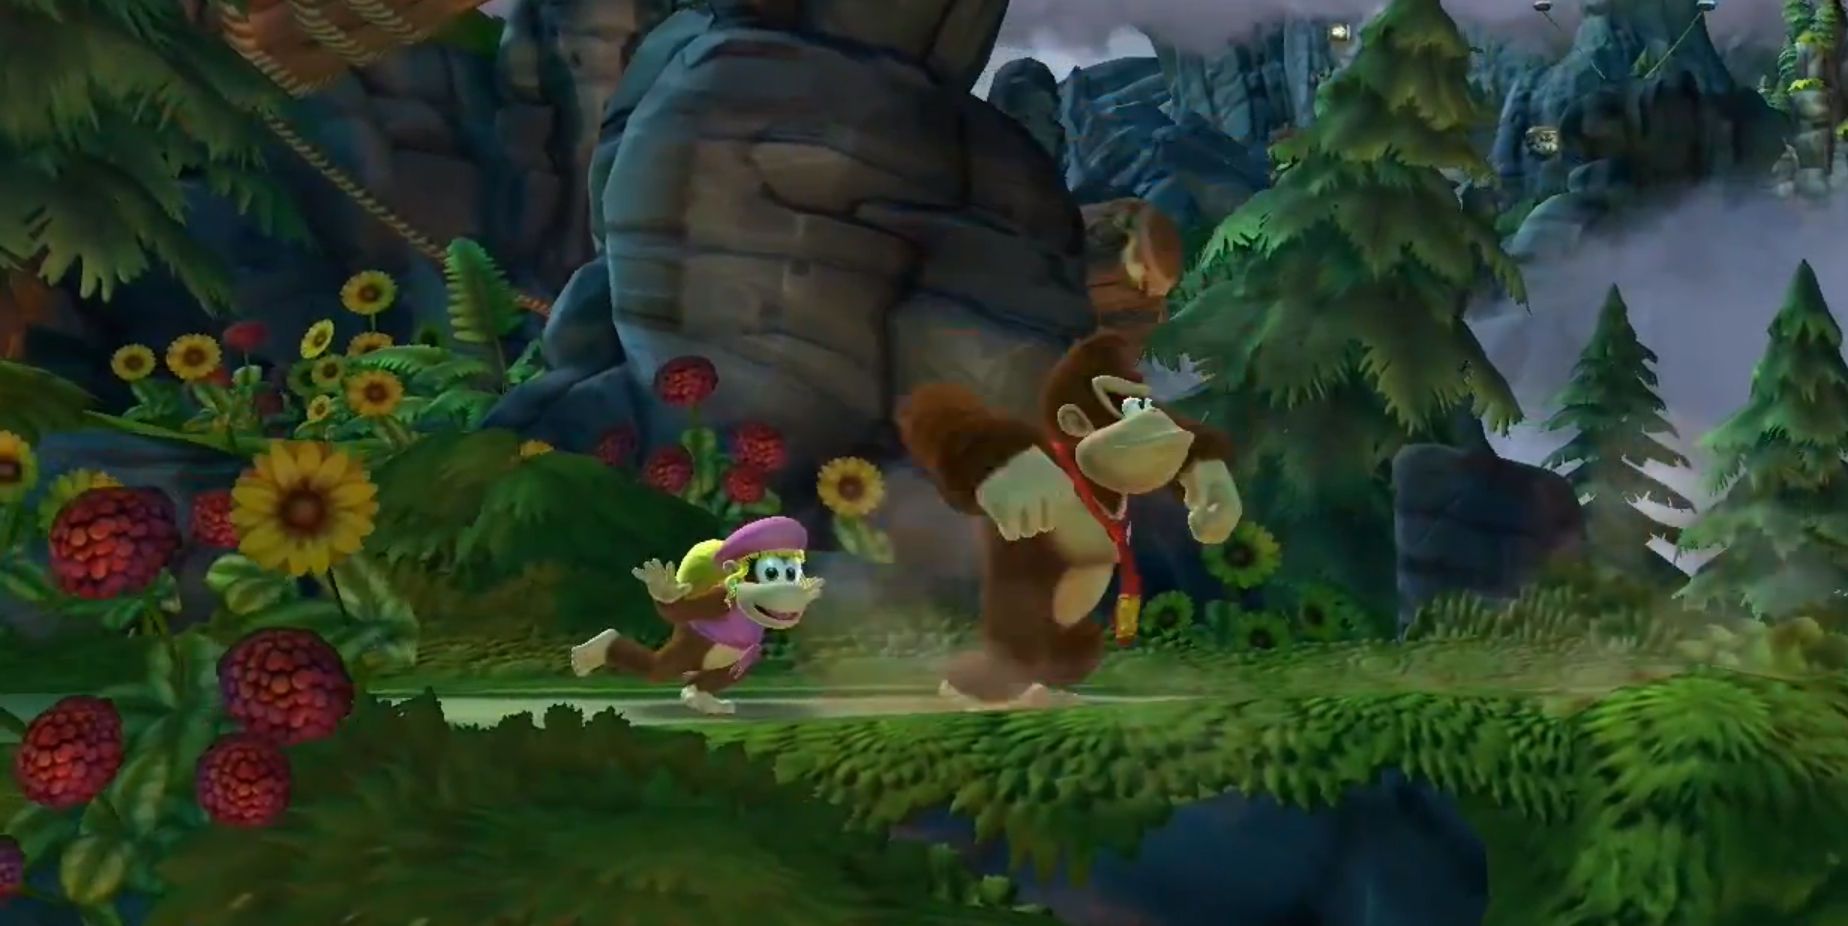 Donkey Kong and Dixie Kong walking in a forest environment